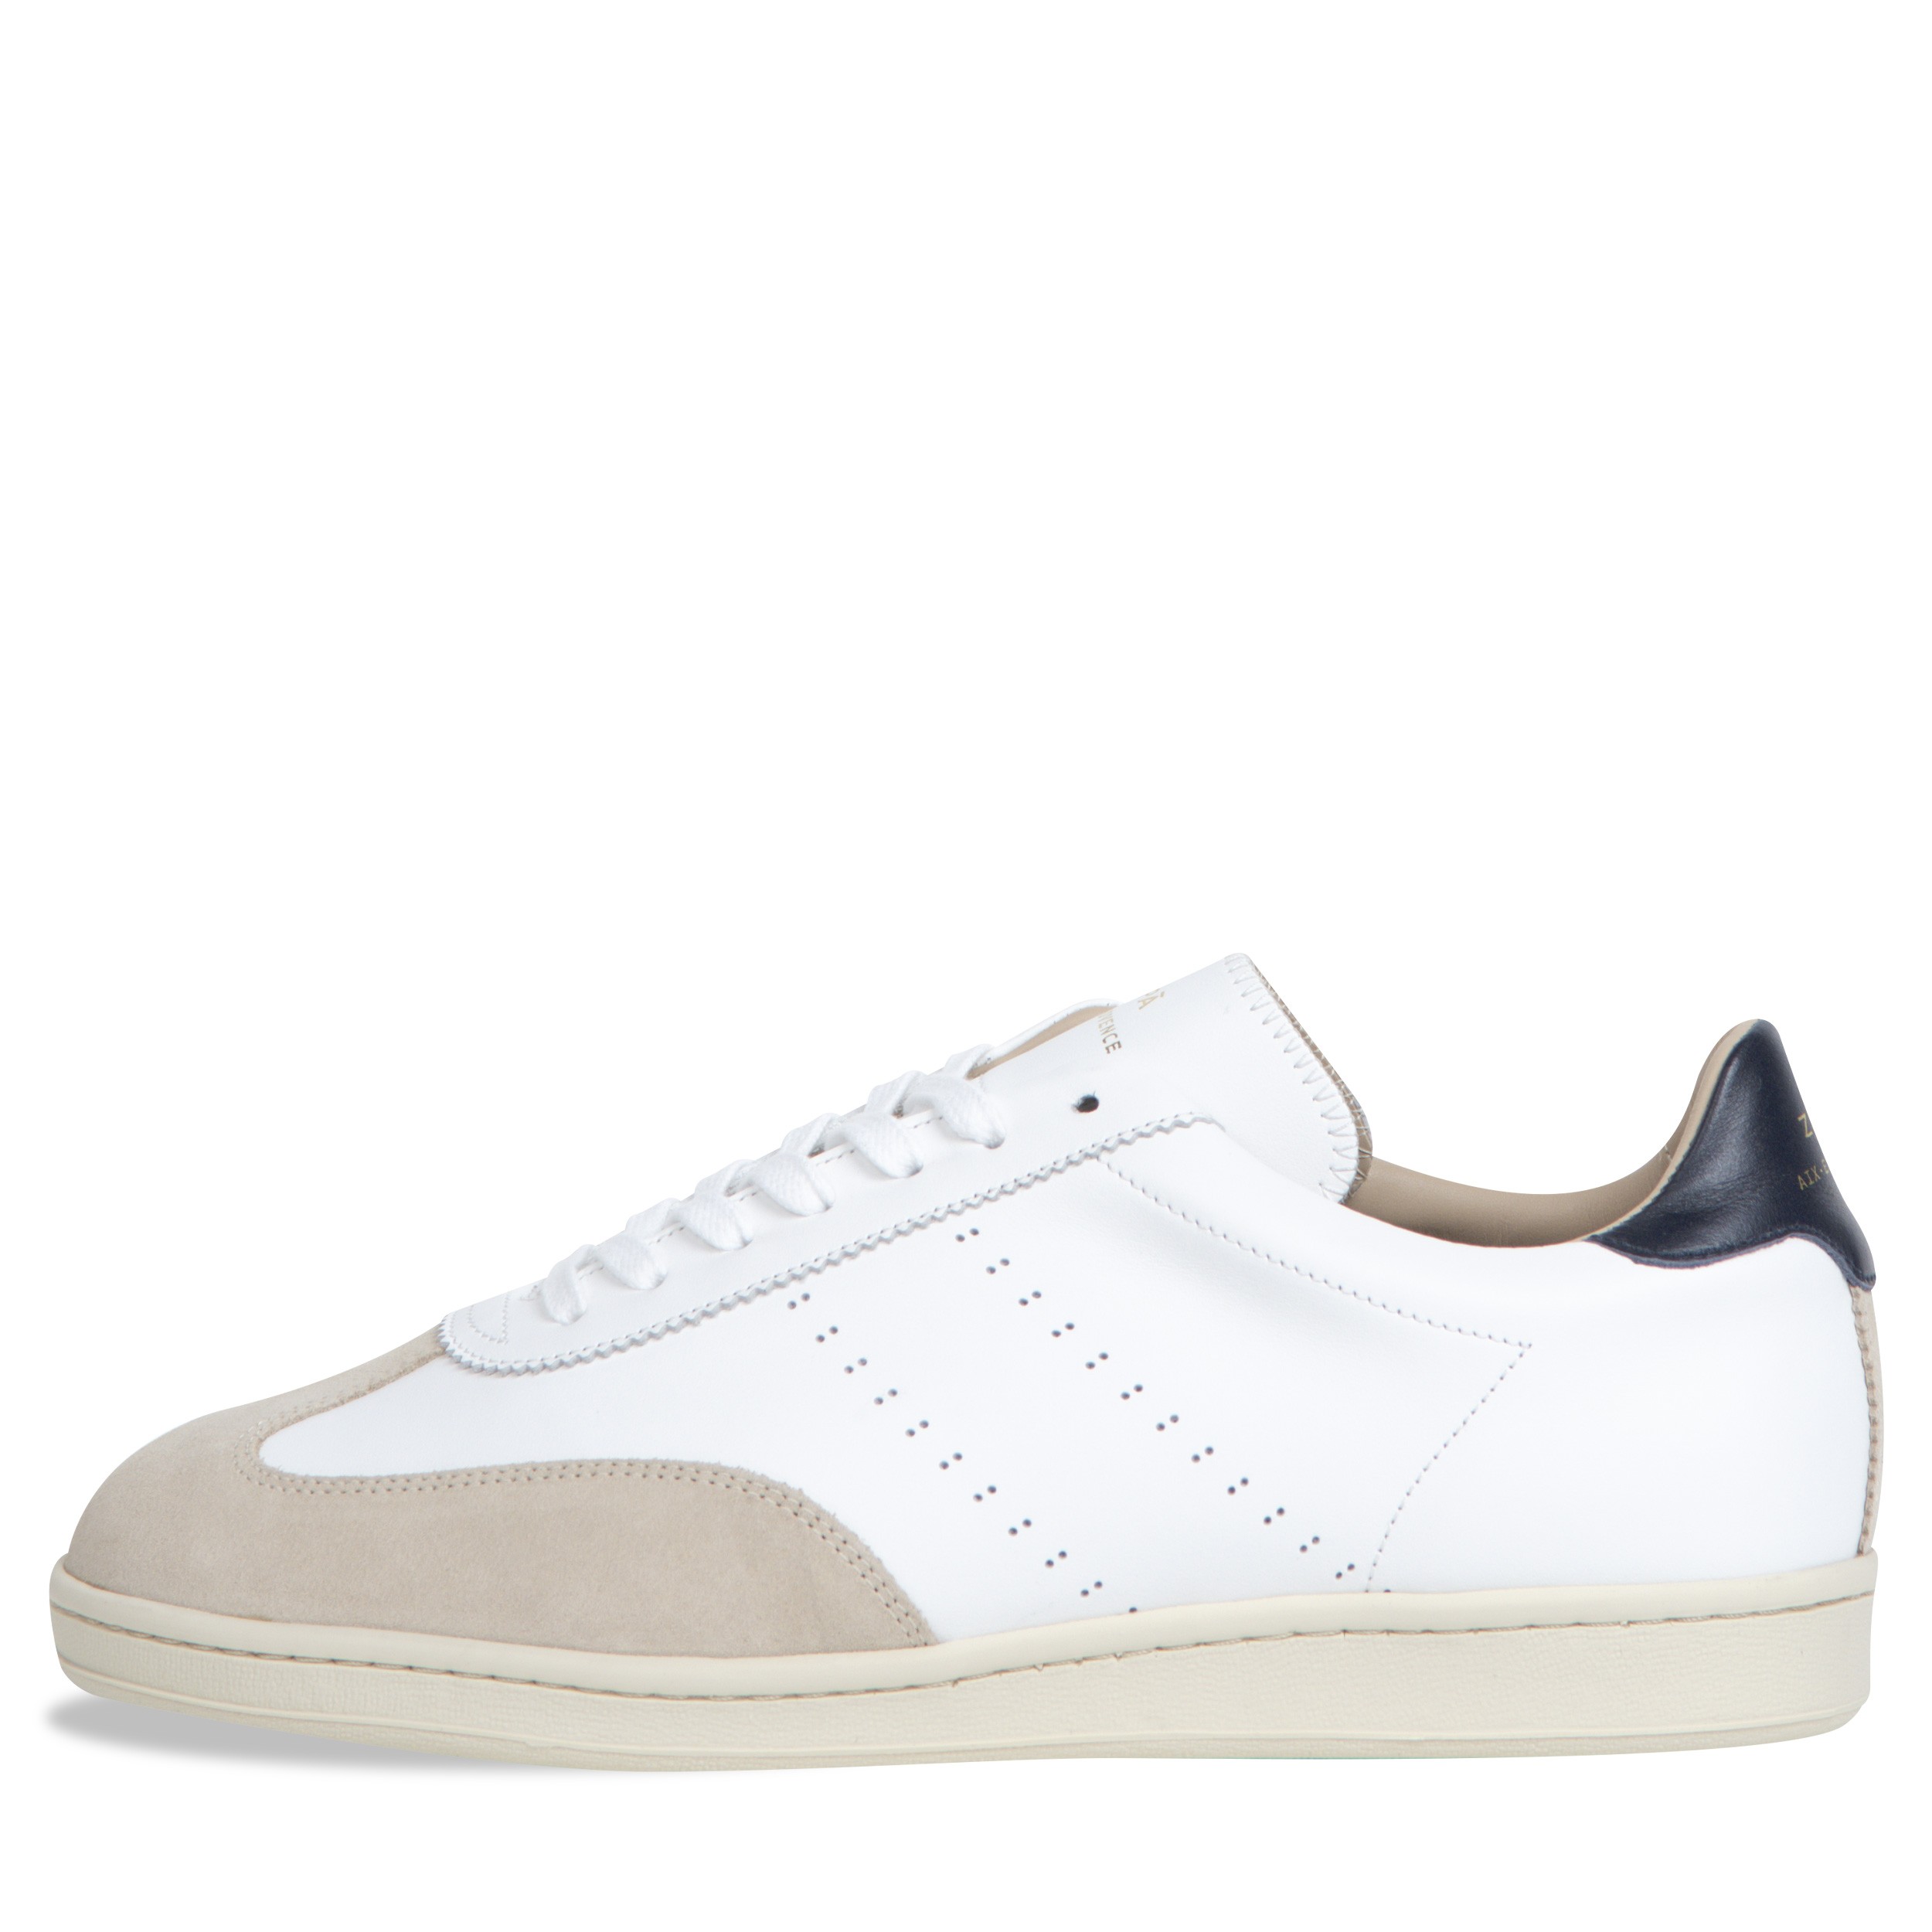 ZESPA 'ZSPGT' Leather Sneaker White And Navy